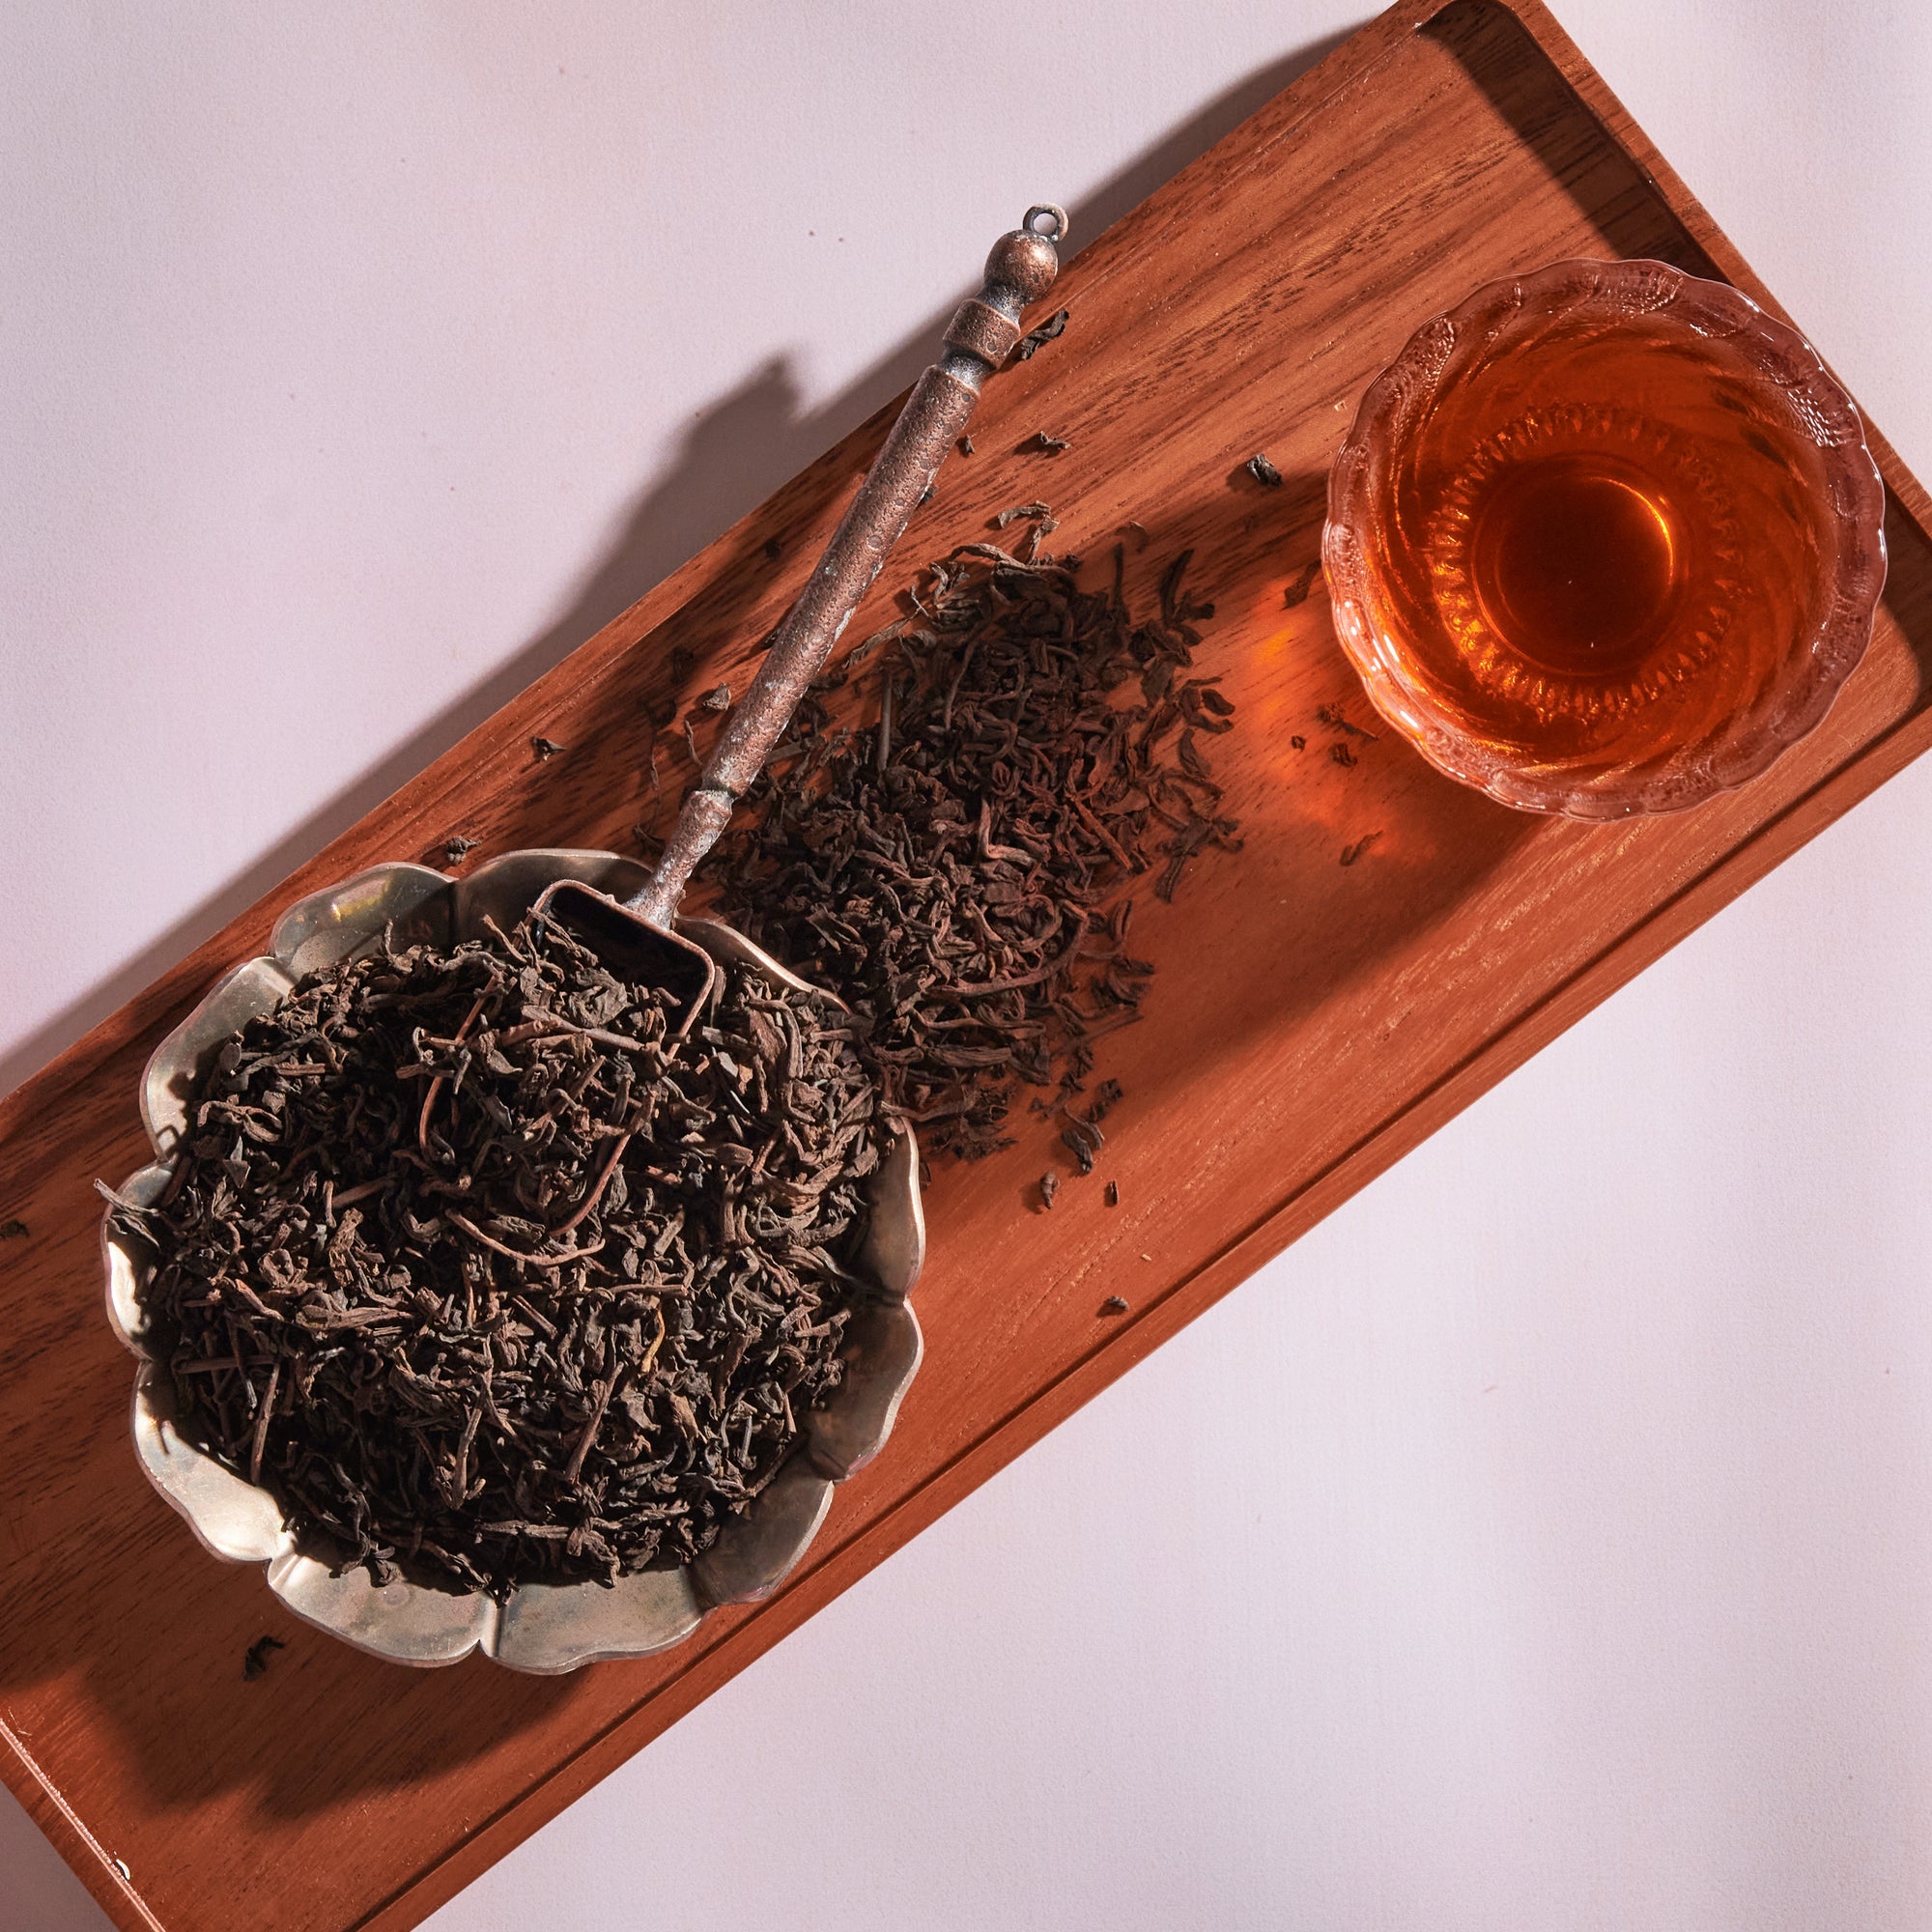 A wooden tray holds a bowl filled with loose leaf Sin Eraser™: Puerh Tea by Magic Hour and a spoon resting on top. Beside the bowl is a glass cup filled with brewed tea, casting a shadow on the tray. The scene suggests a tea preparation setup with warm, inviting aromas and rich health benefits.